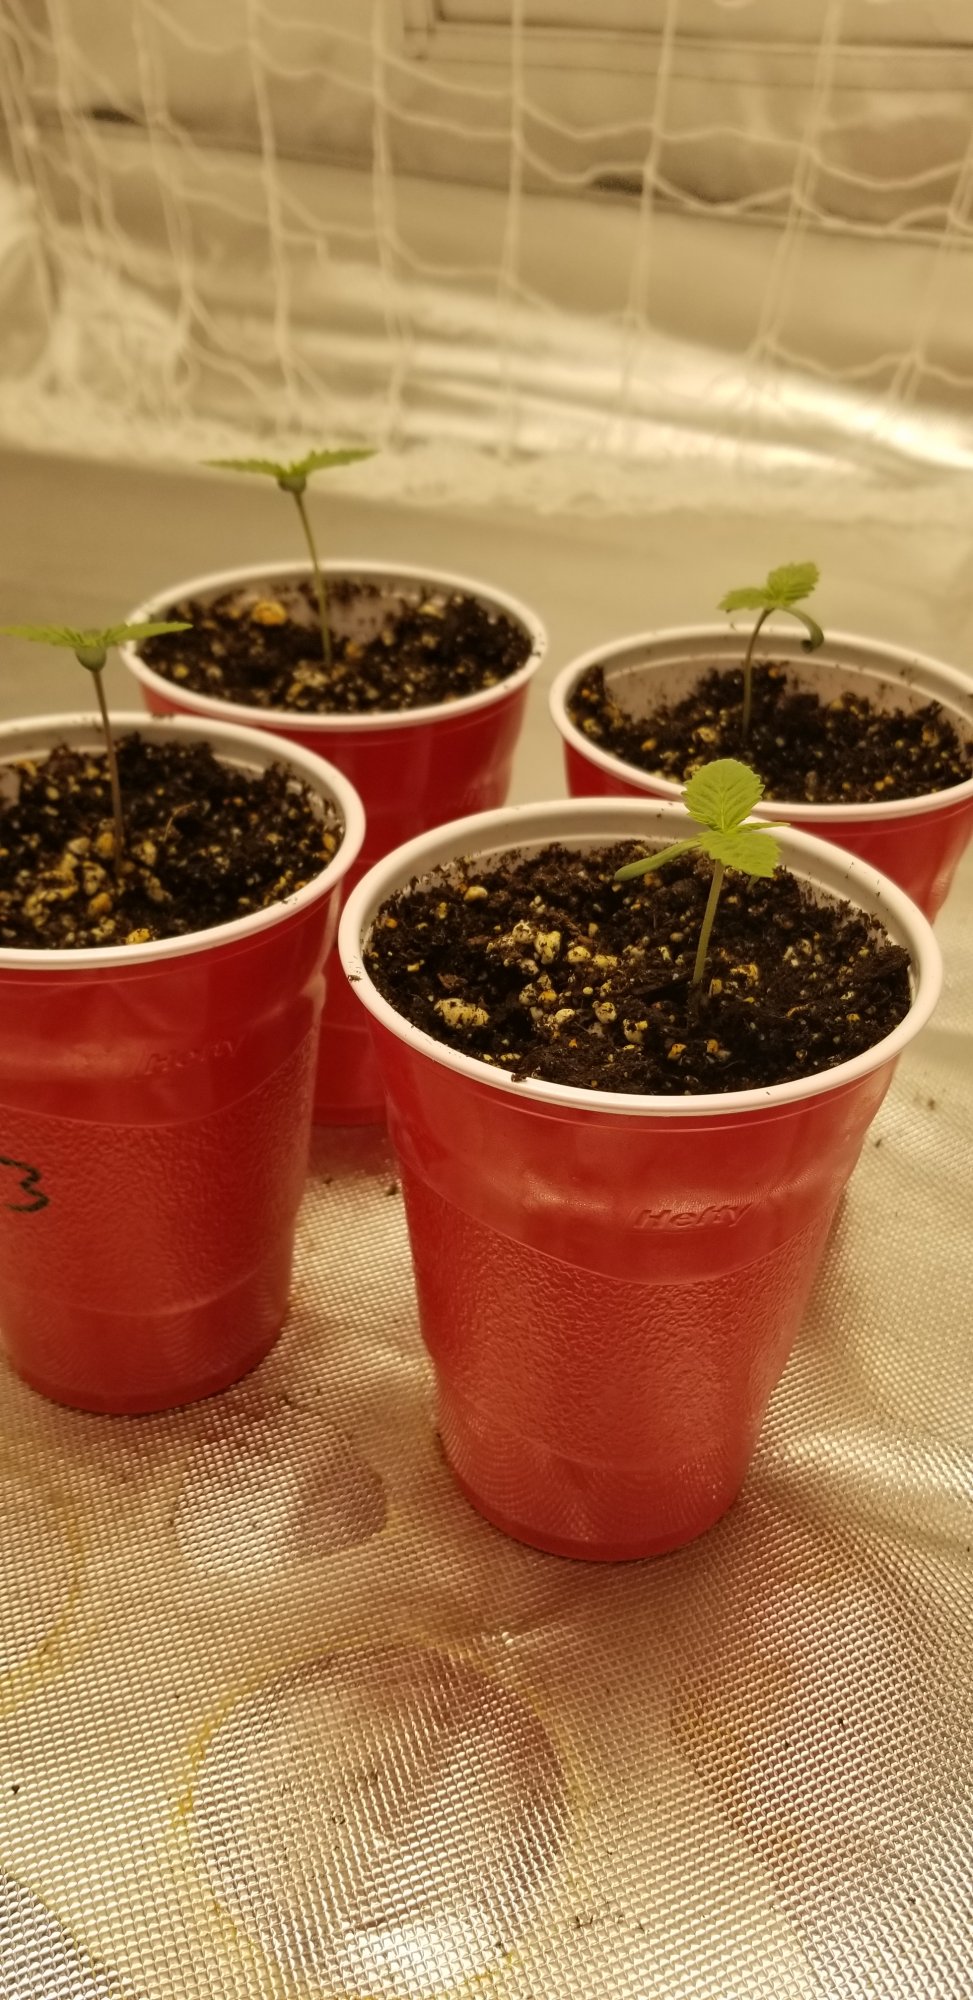 Slow growth   what am i doing wrong